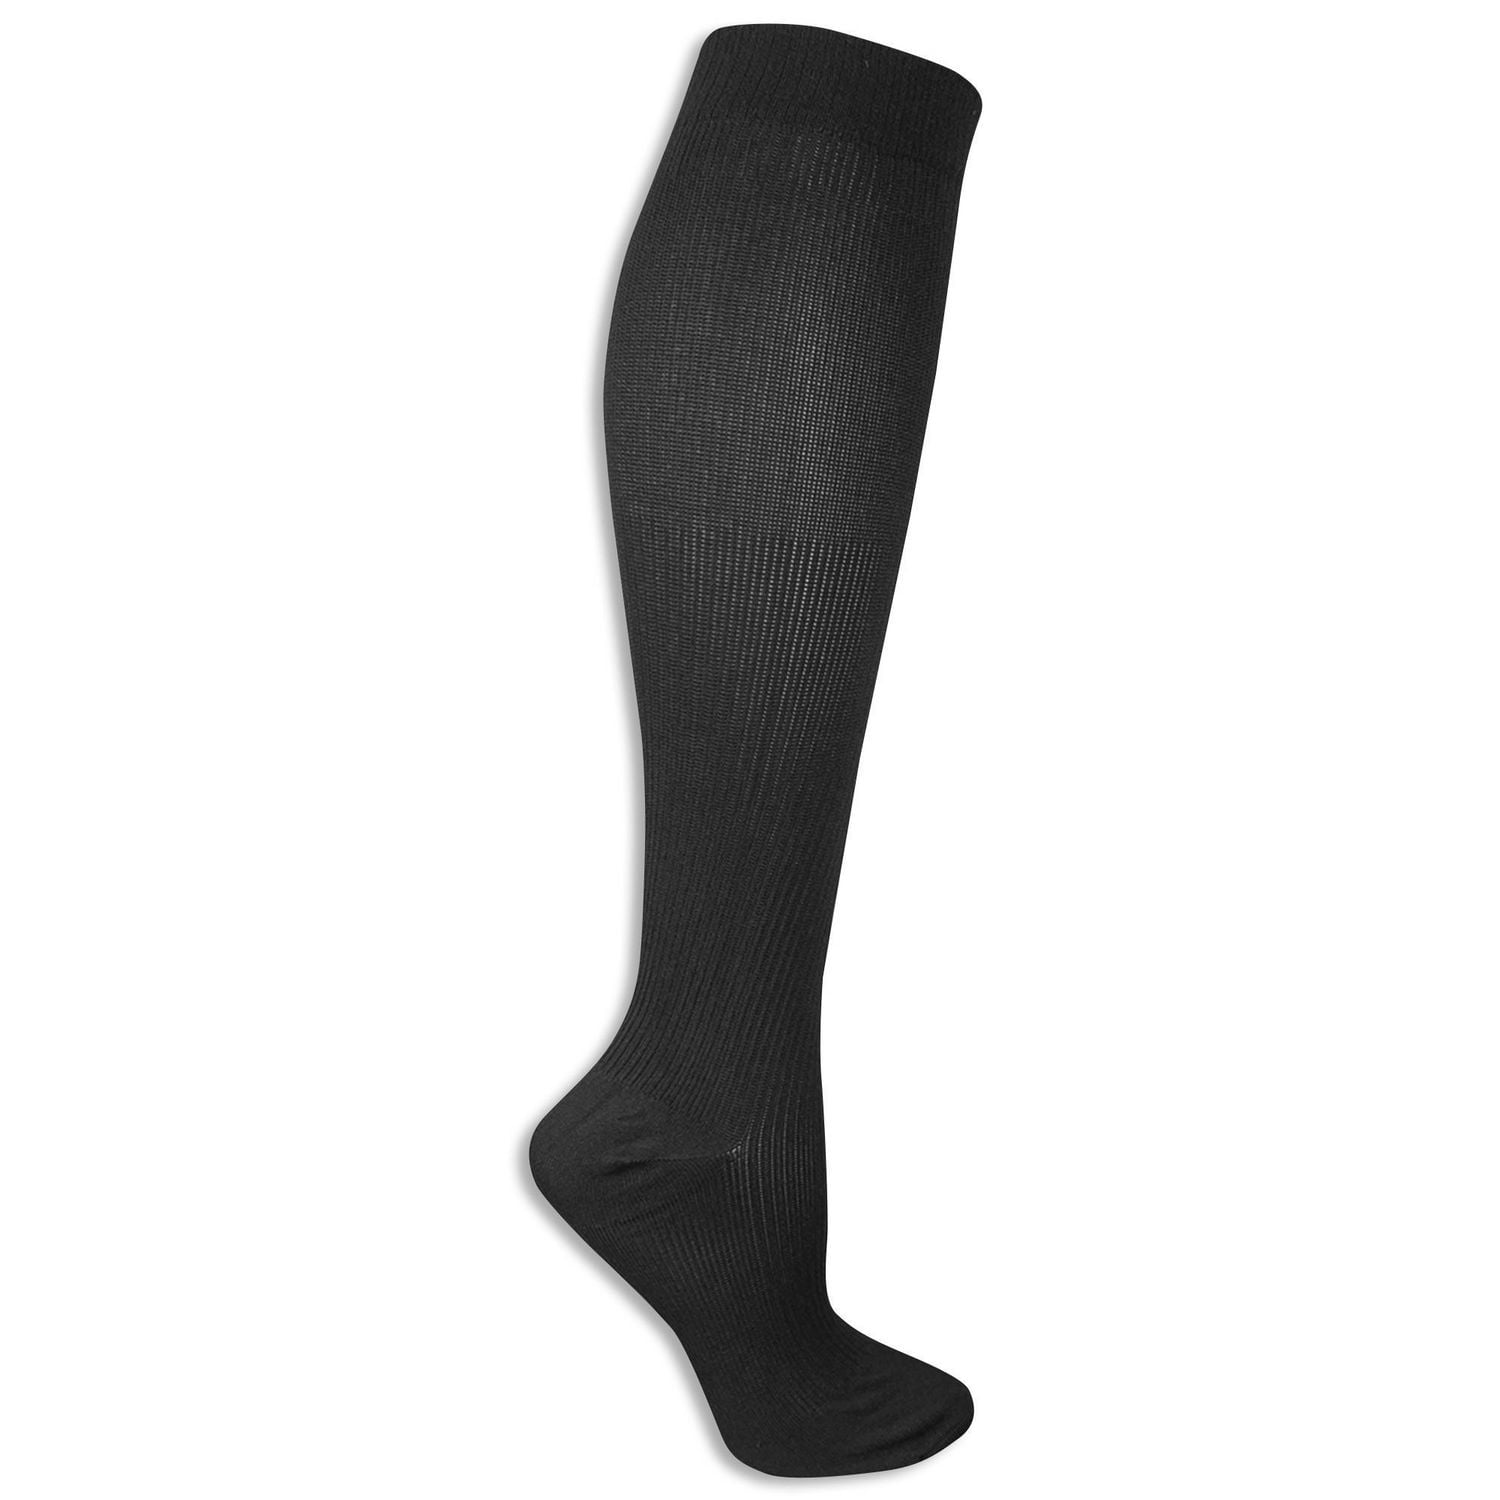 Dr. Scholl's - Travel Compression Knee High 1 Pair, Travel